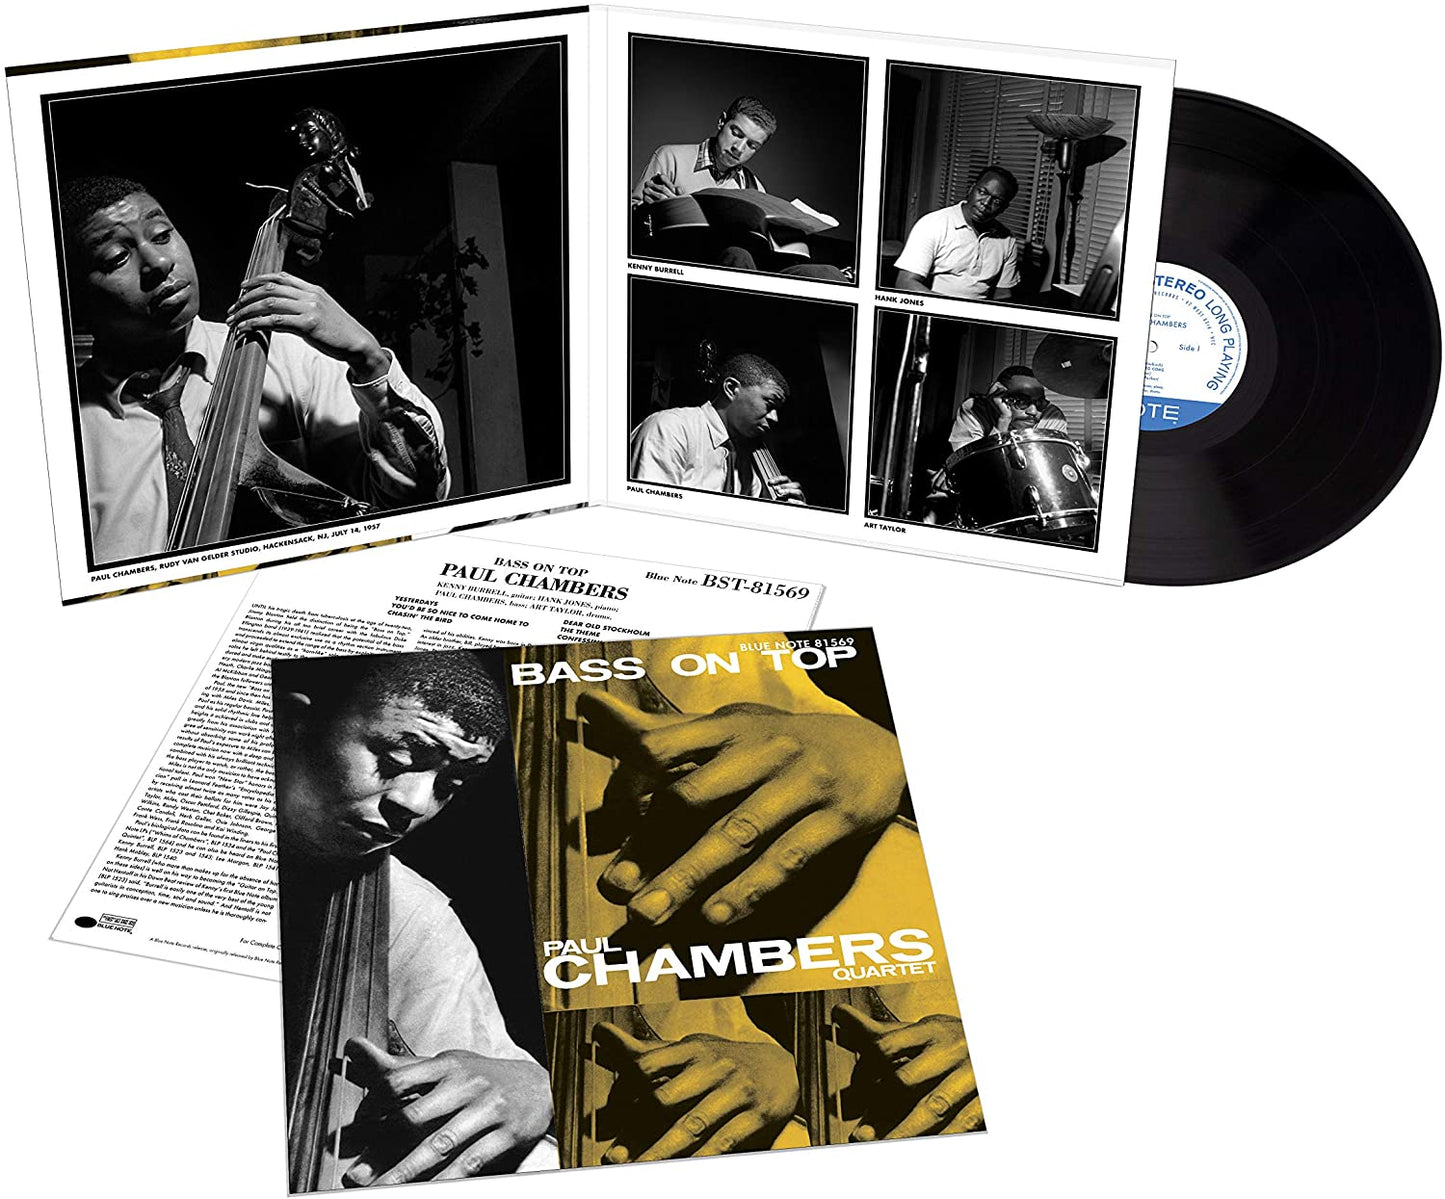 Chambers, Paul/Bass On Top (Blue Note Tone Poet) [LP]